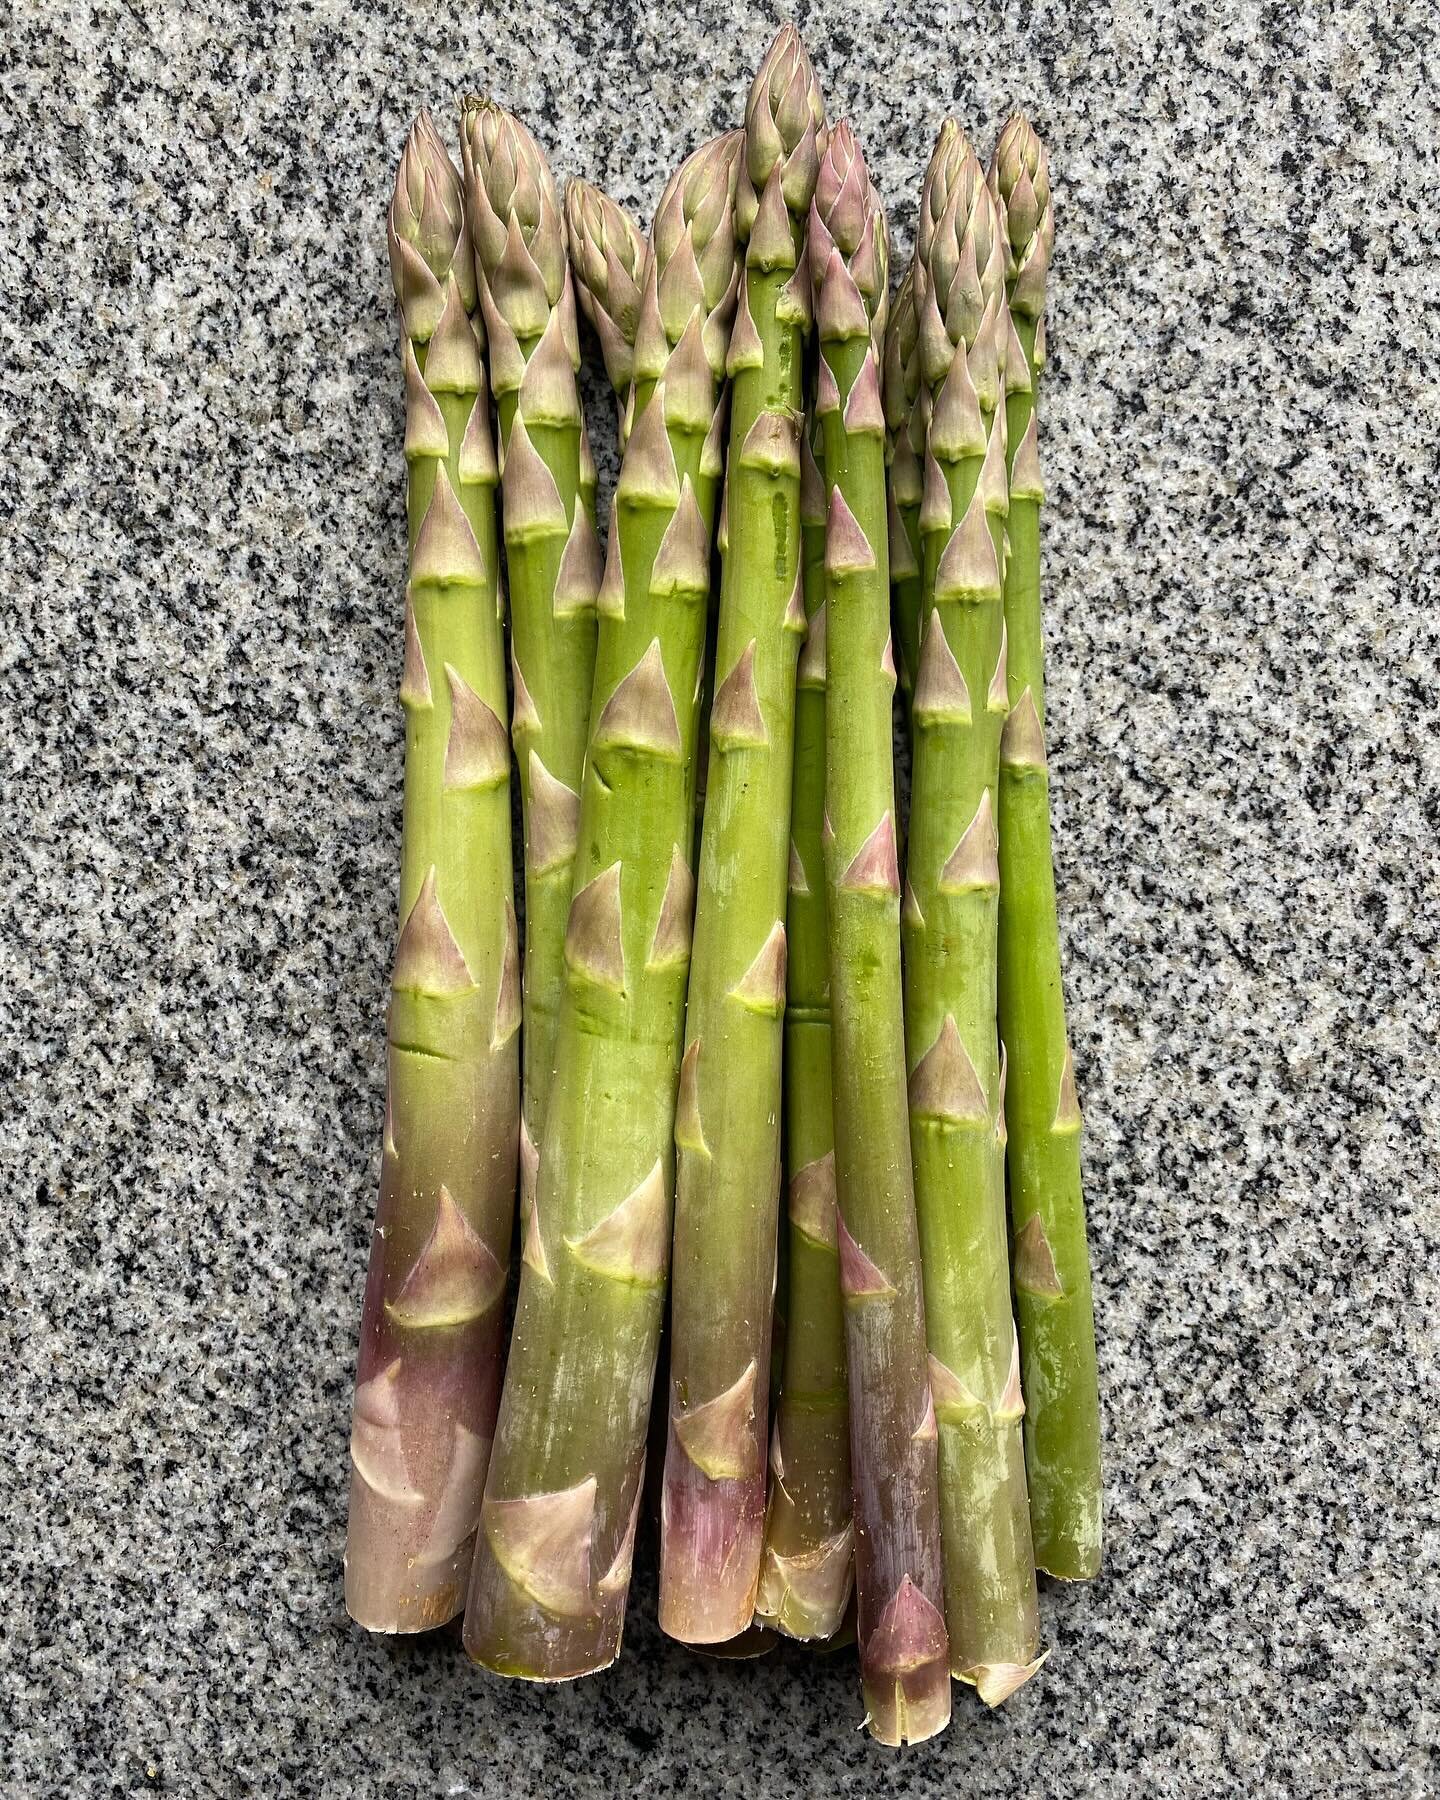 Another sign of spring, very early English asparagus. A real treat and the first of the season. Hopefully be some local asparagus&rsquo;s at @whiteleysfarm in the next month or so too. #firstasparagus #earlyspring #seasonalproduce #asparaguslover #fr